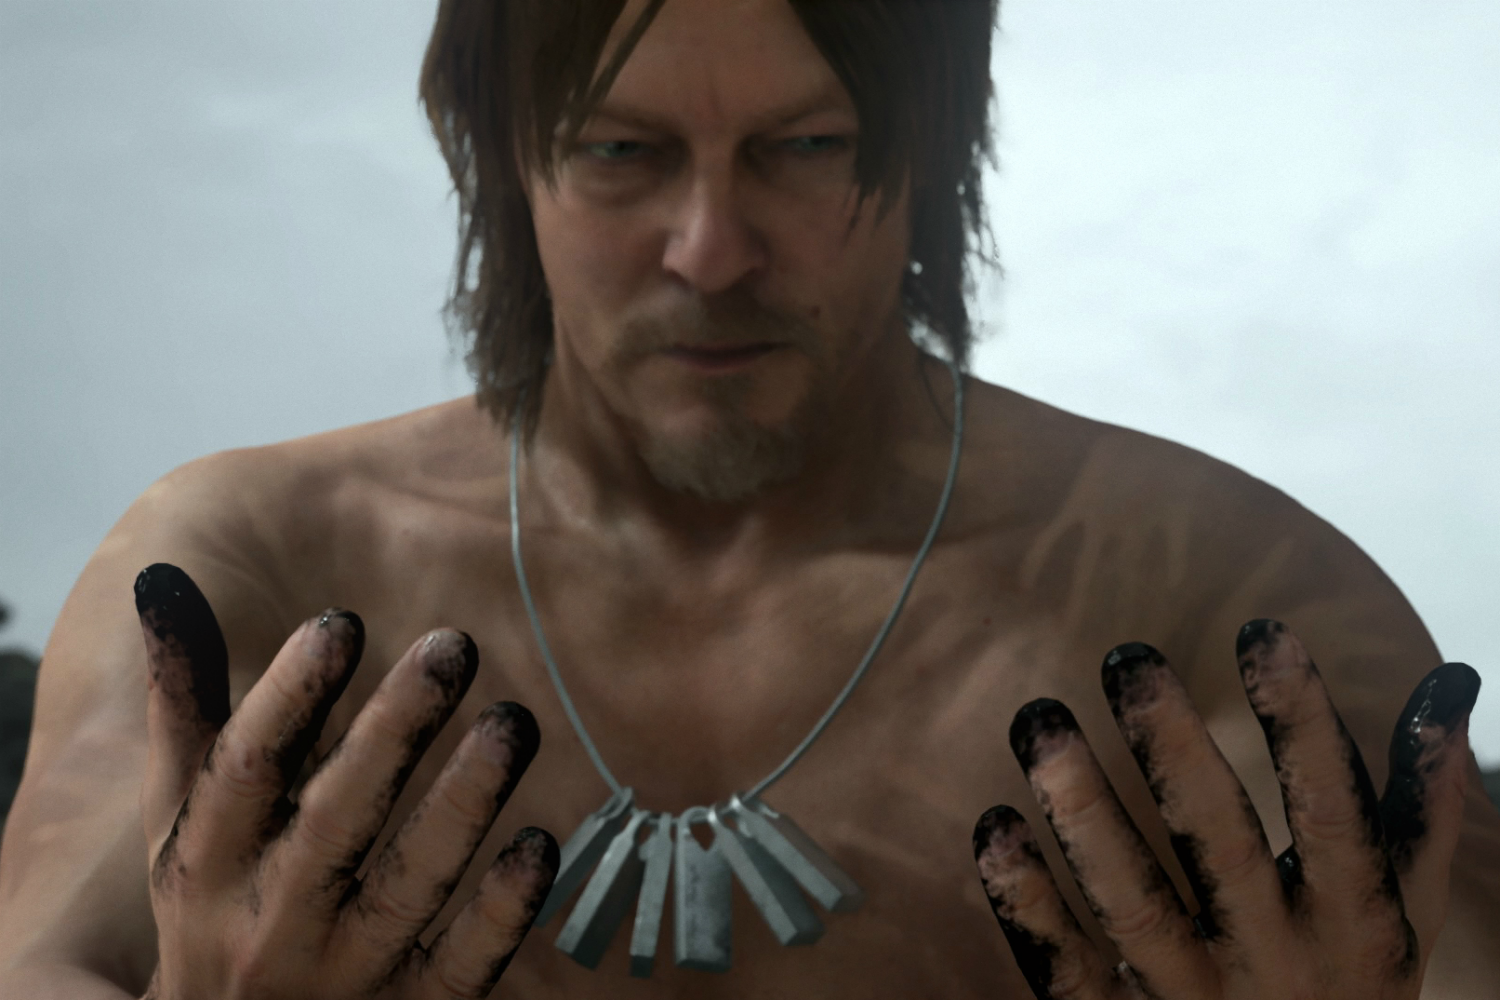 Metacritic deleted over 6,000 negative Death Stranding ratings